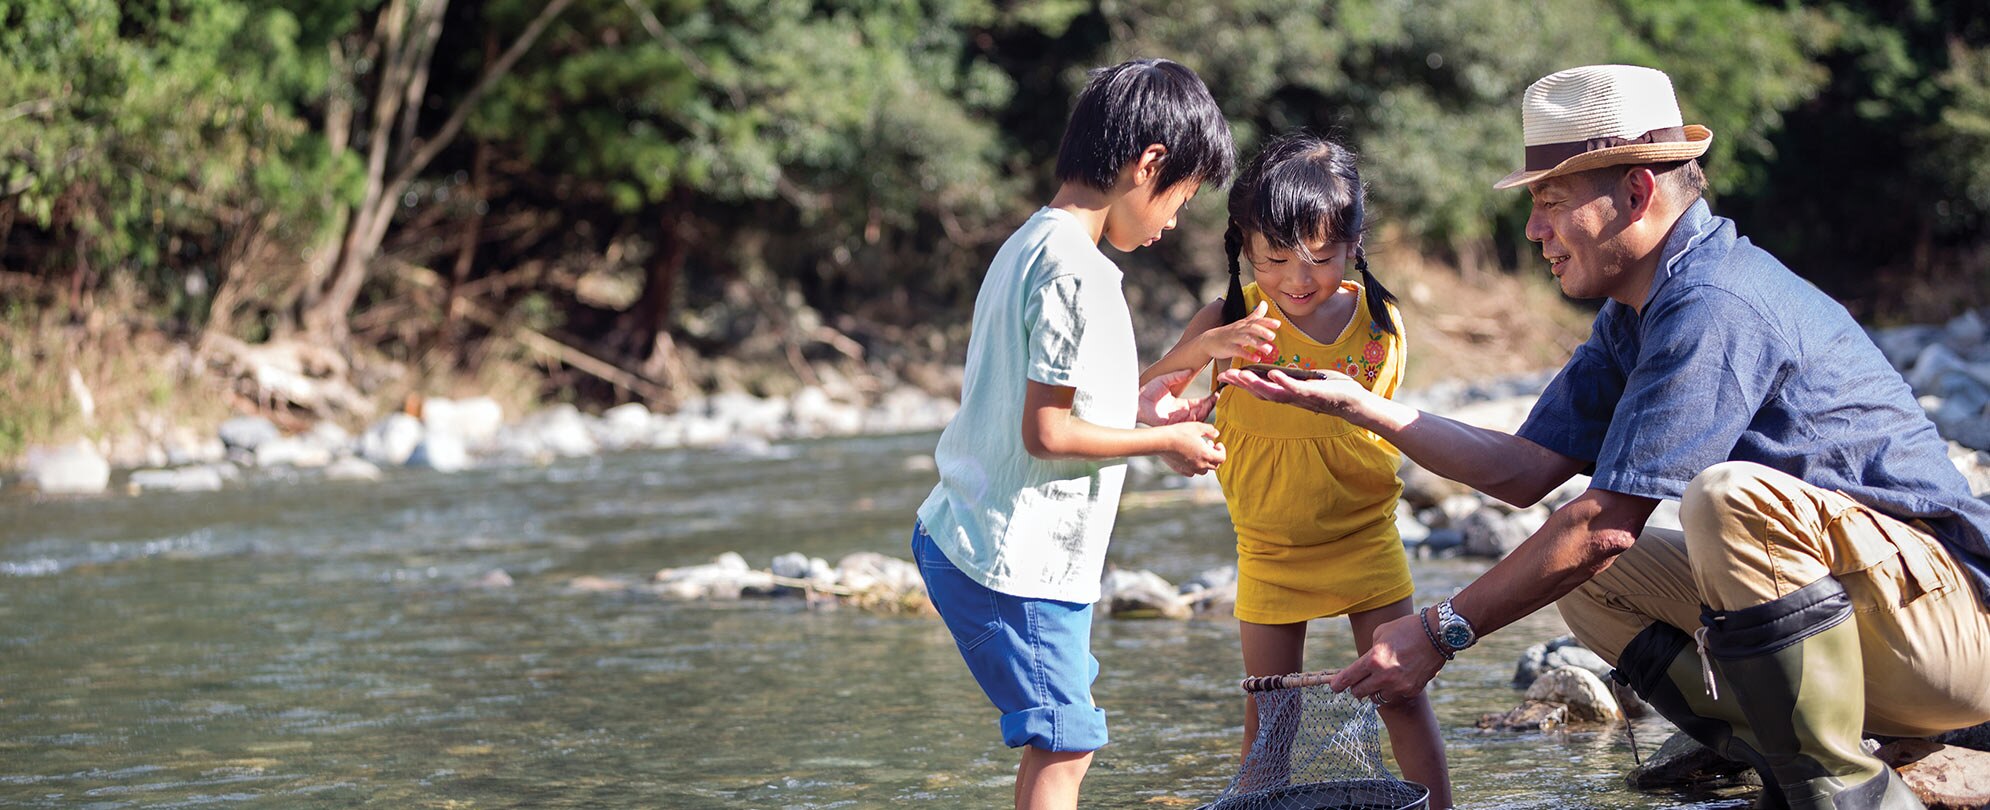 A father and his two kids standing in shallow water, looking at something the father found in the river.